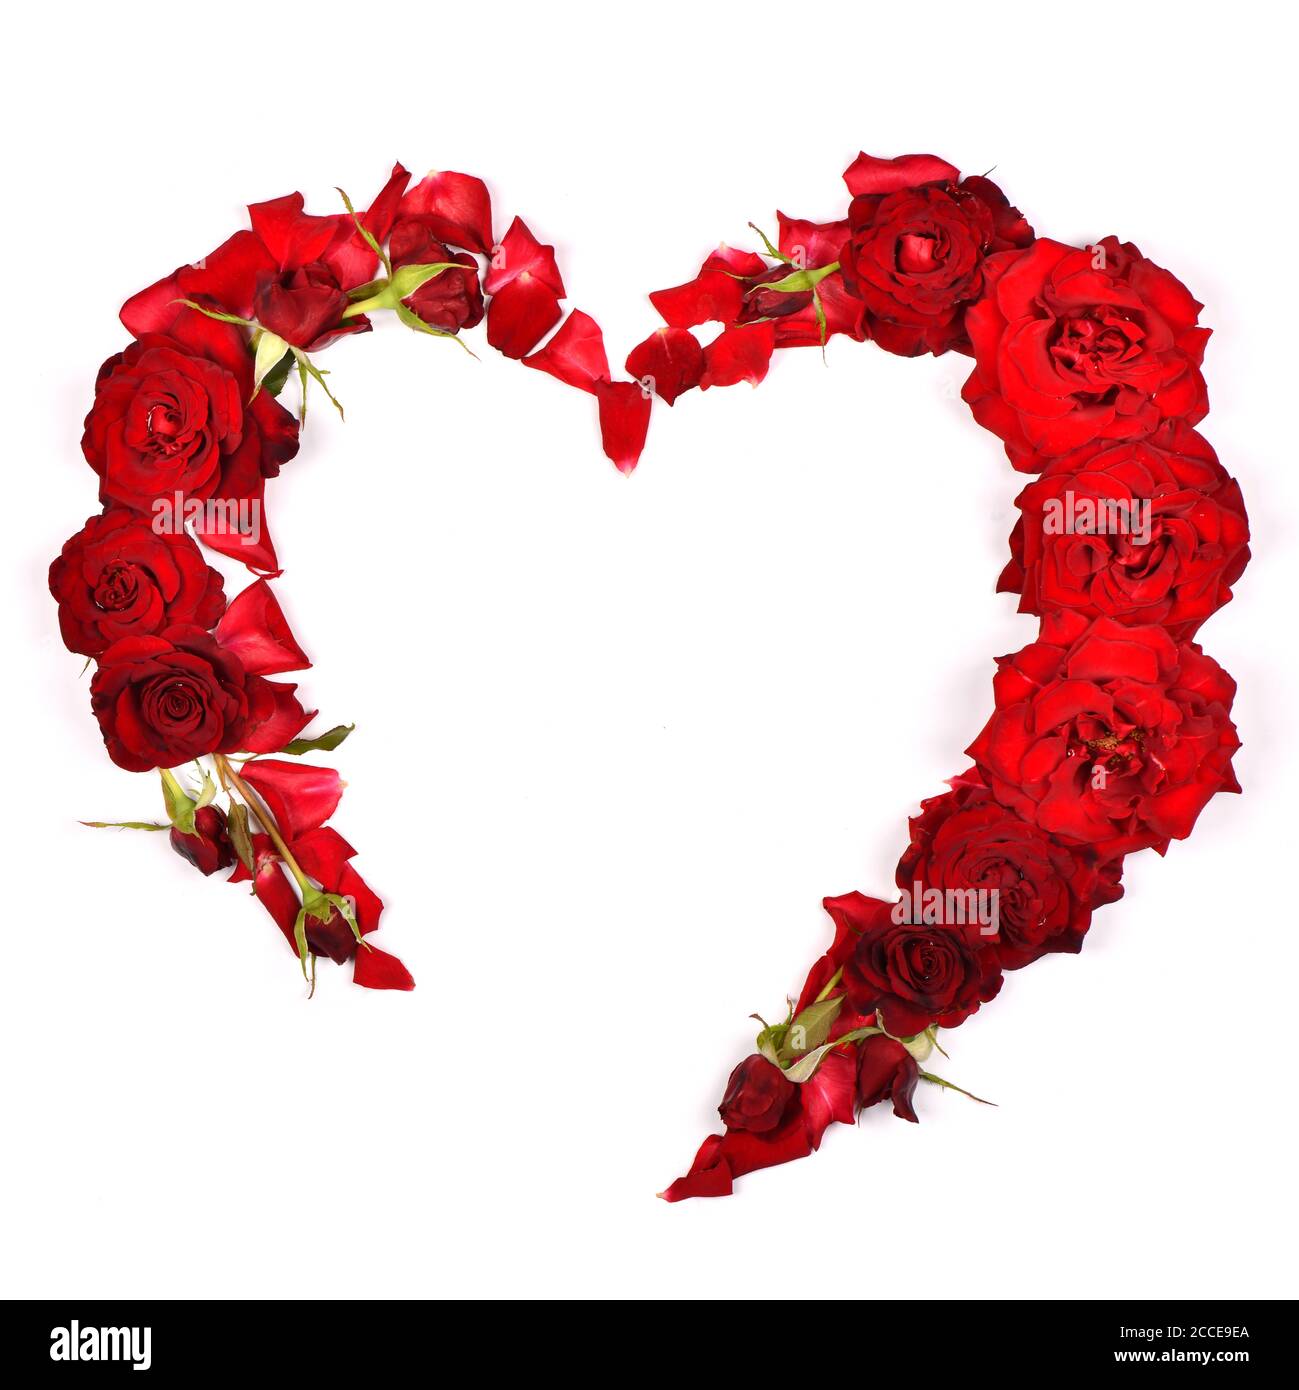 Beautiful red rose flowers set out in the form of heart. Isolated on ...